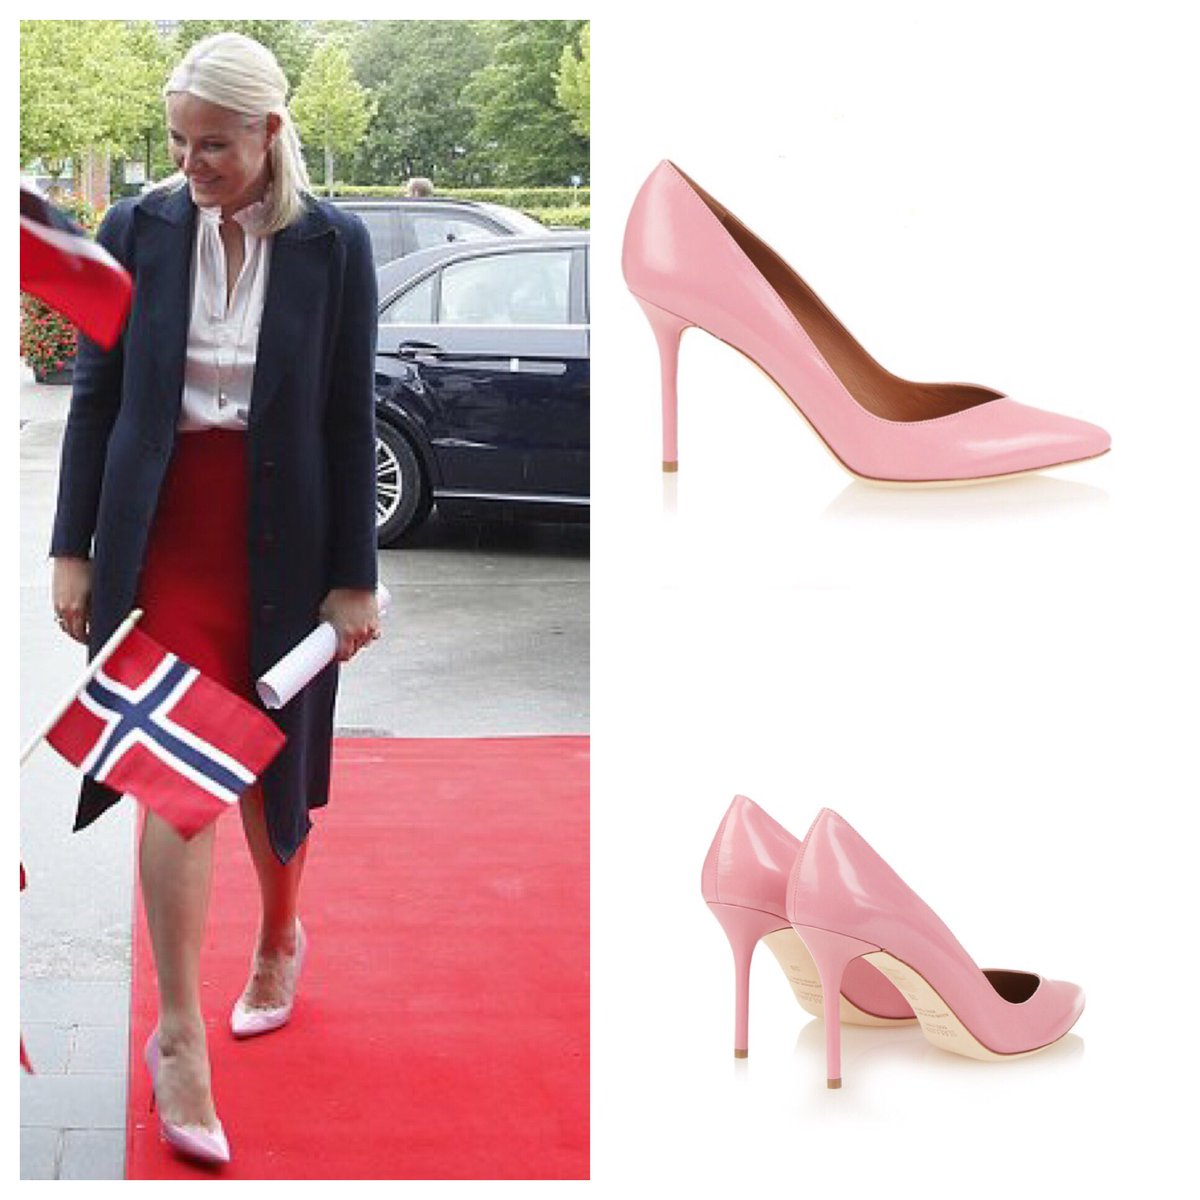 New Find! 7/7/17: #CrownPrincessMetteMarit wore the Malone Souliers ‘Brenda’ Point-Toe Leather Pumps in Pink at one of her events. (📷: @crownprincessmm @parismatch_magazine @malonesouliers @lyst) (ID’ed by Me!)